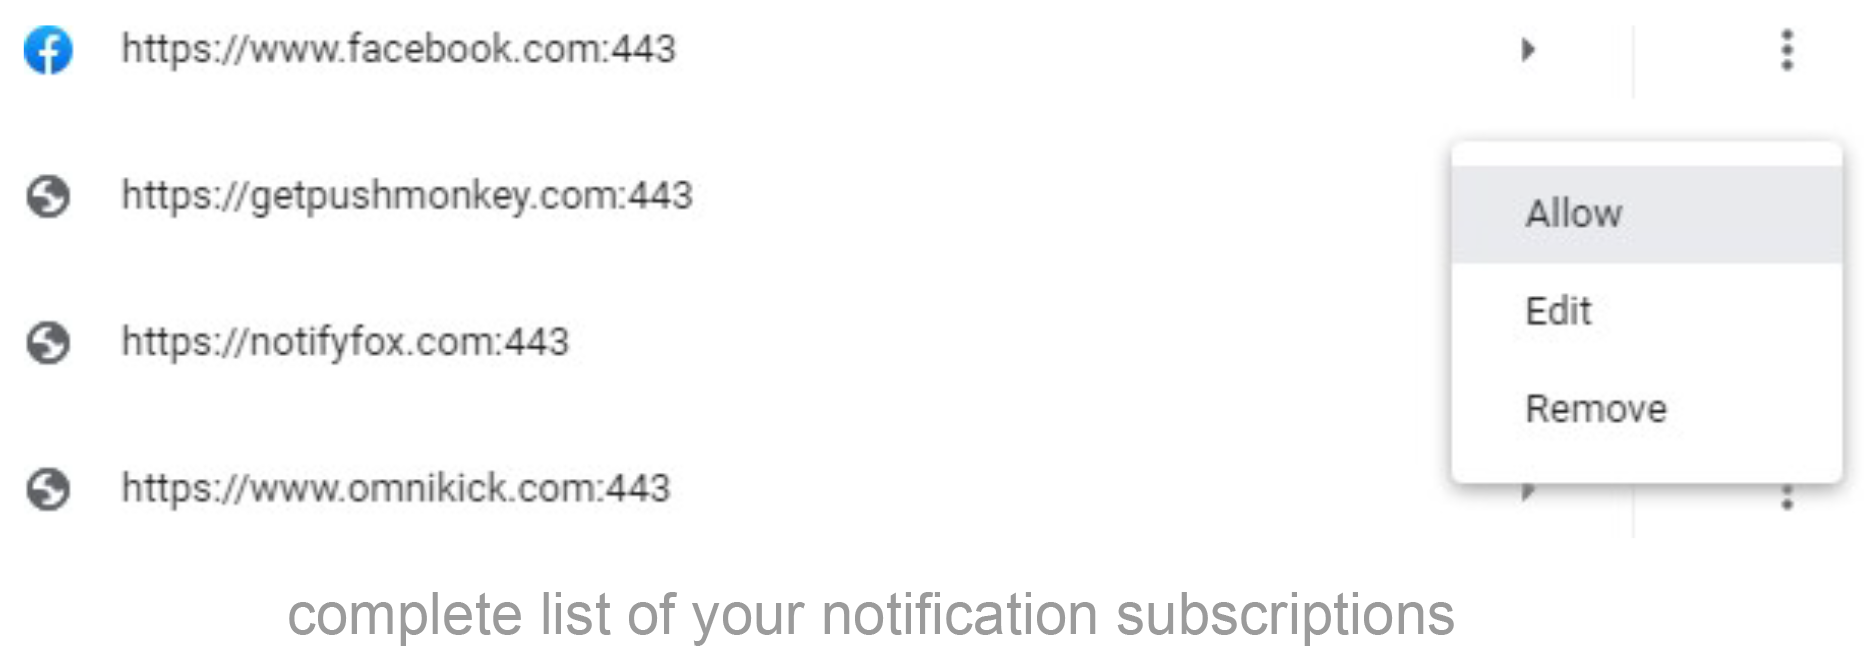 notification subscriptions